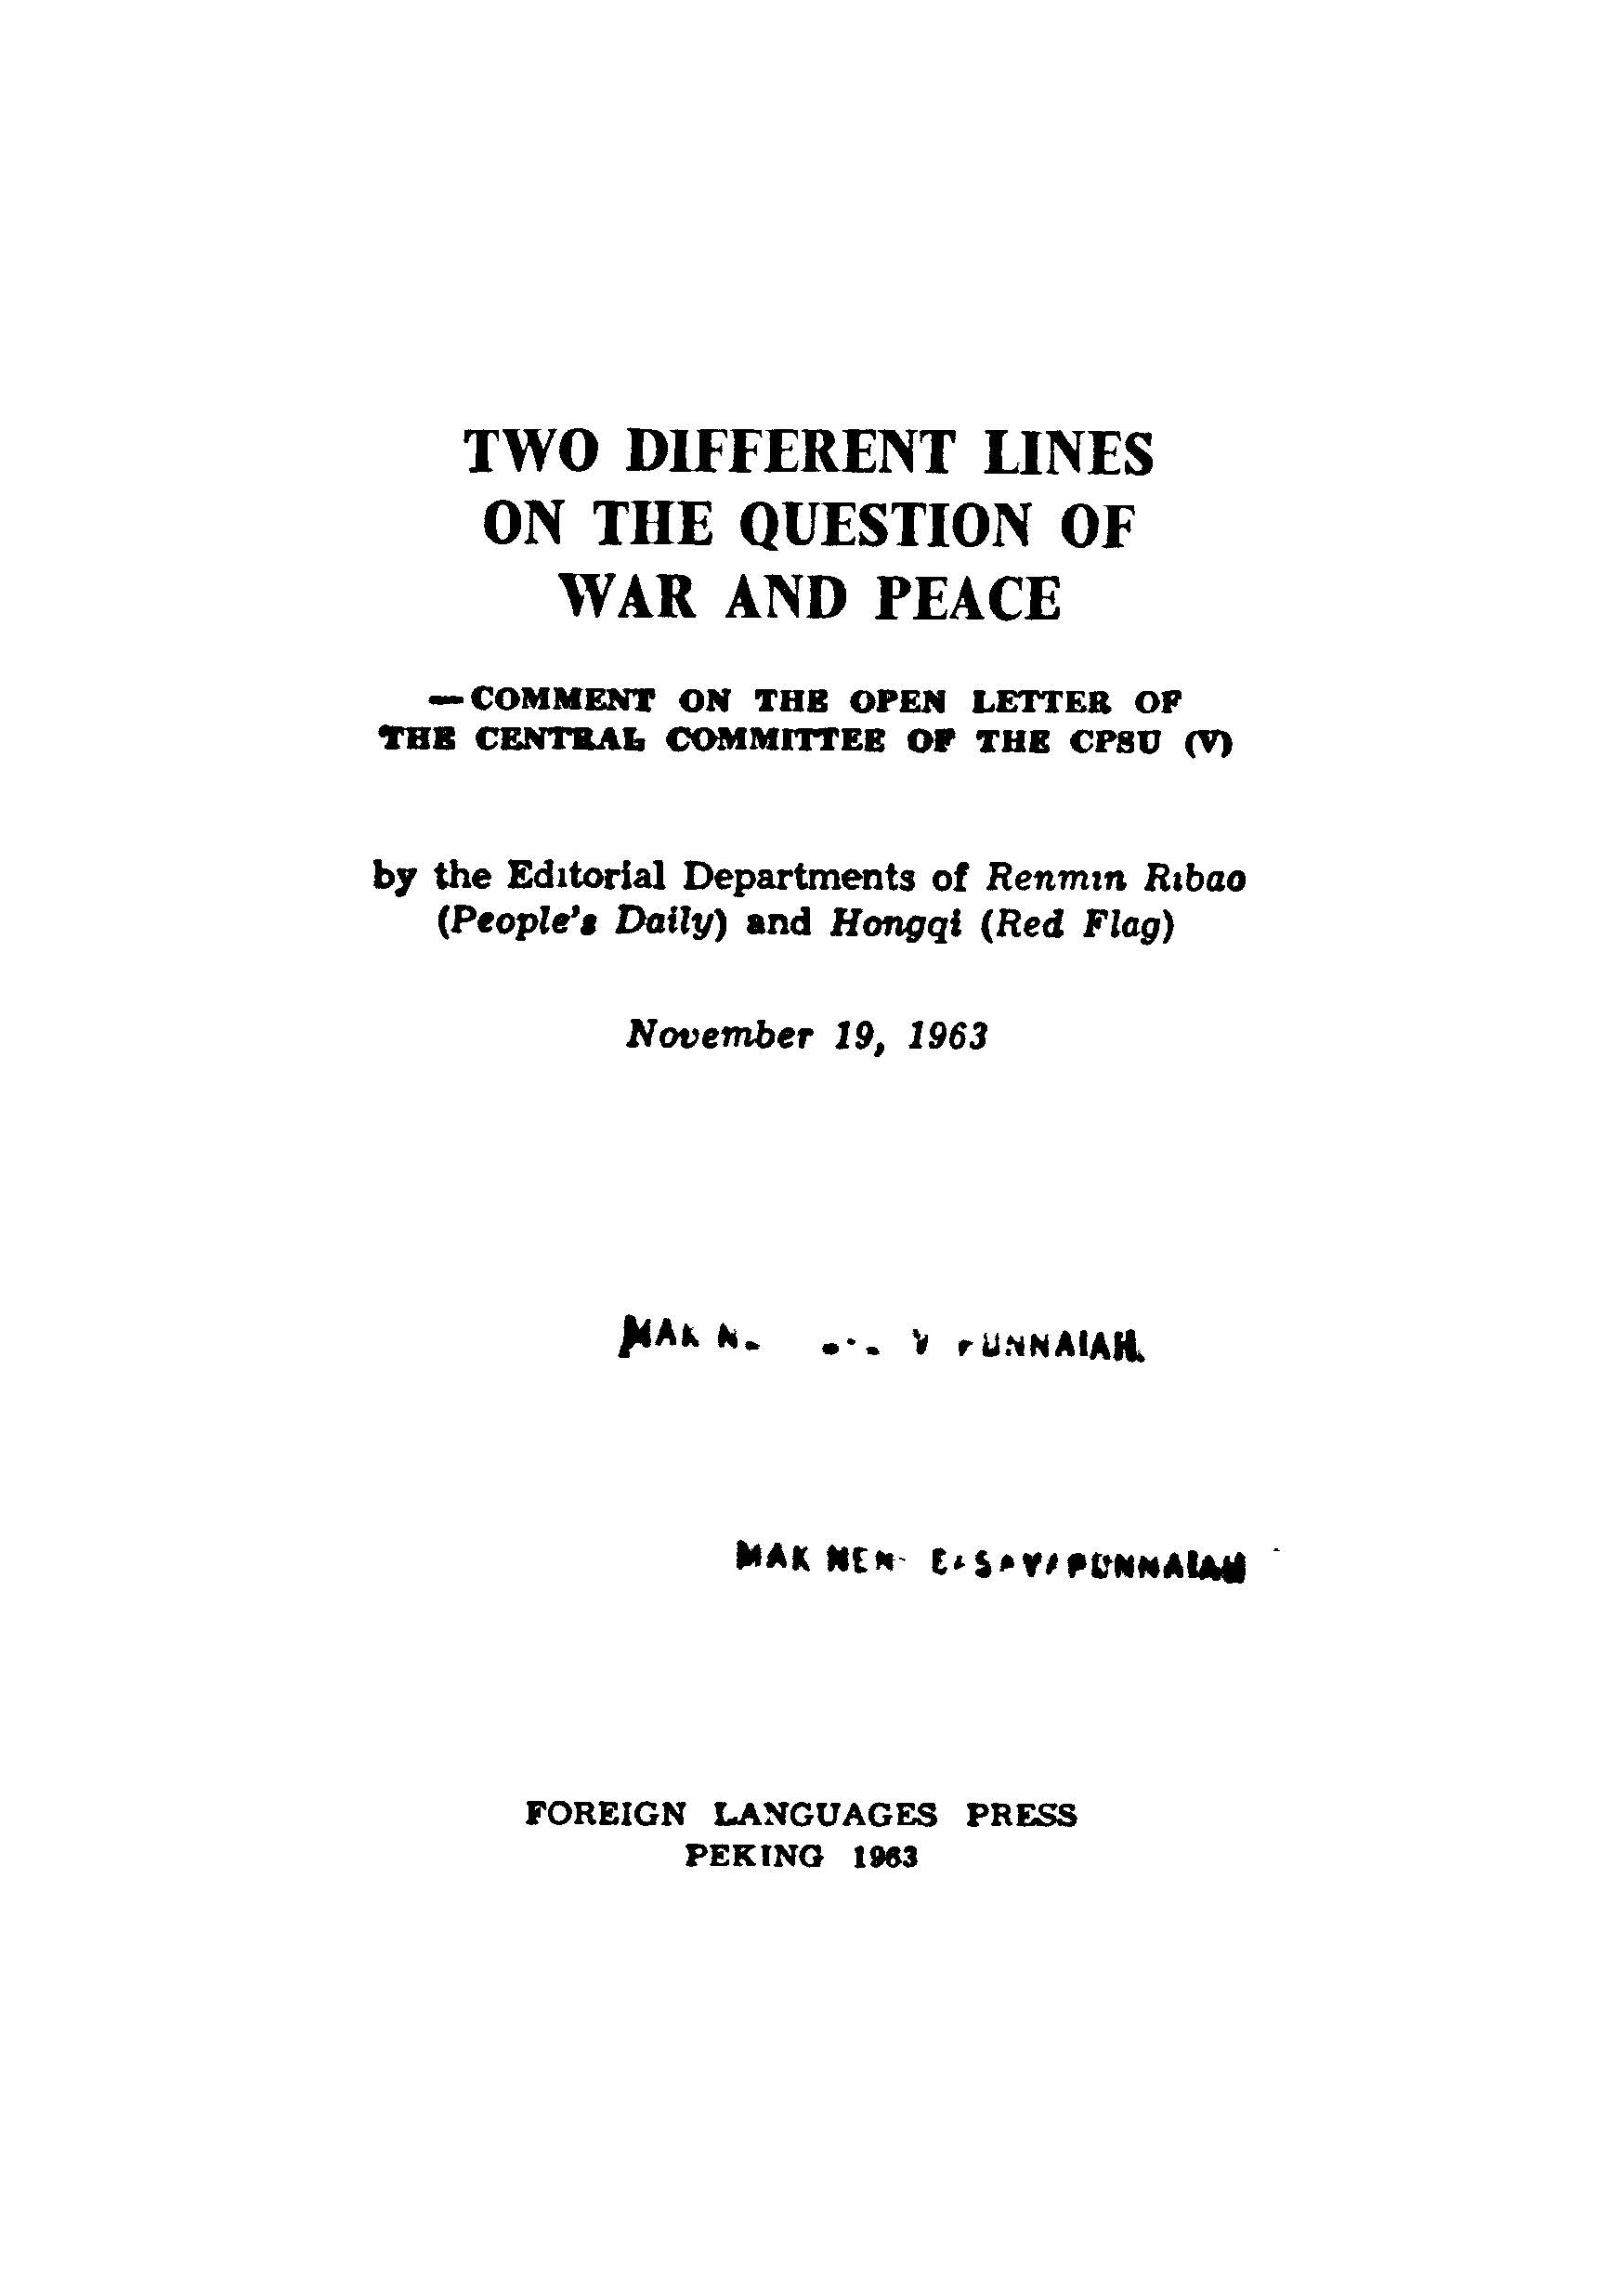 Two different lines on the question of war and peace (november 19, 1963)